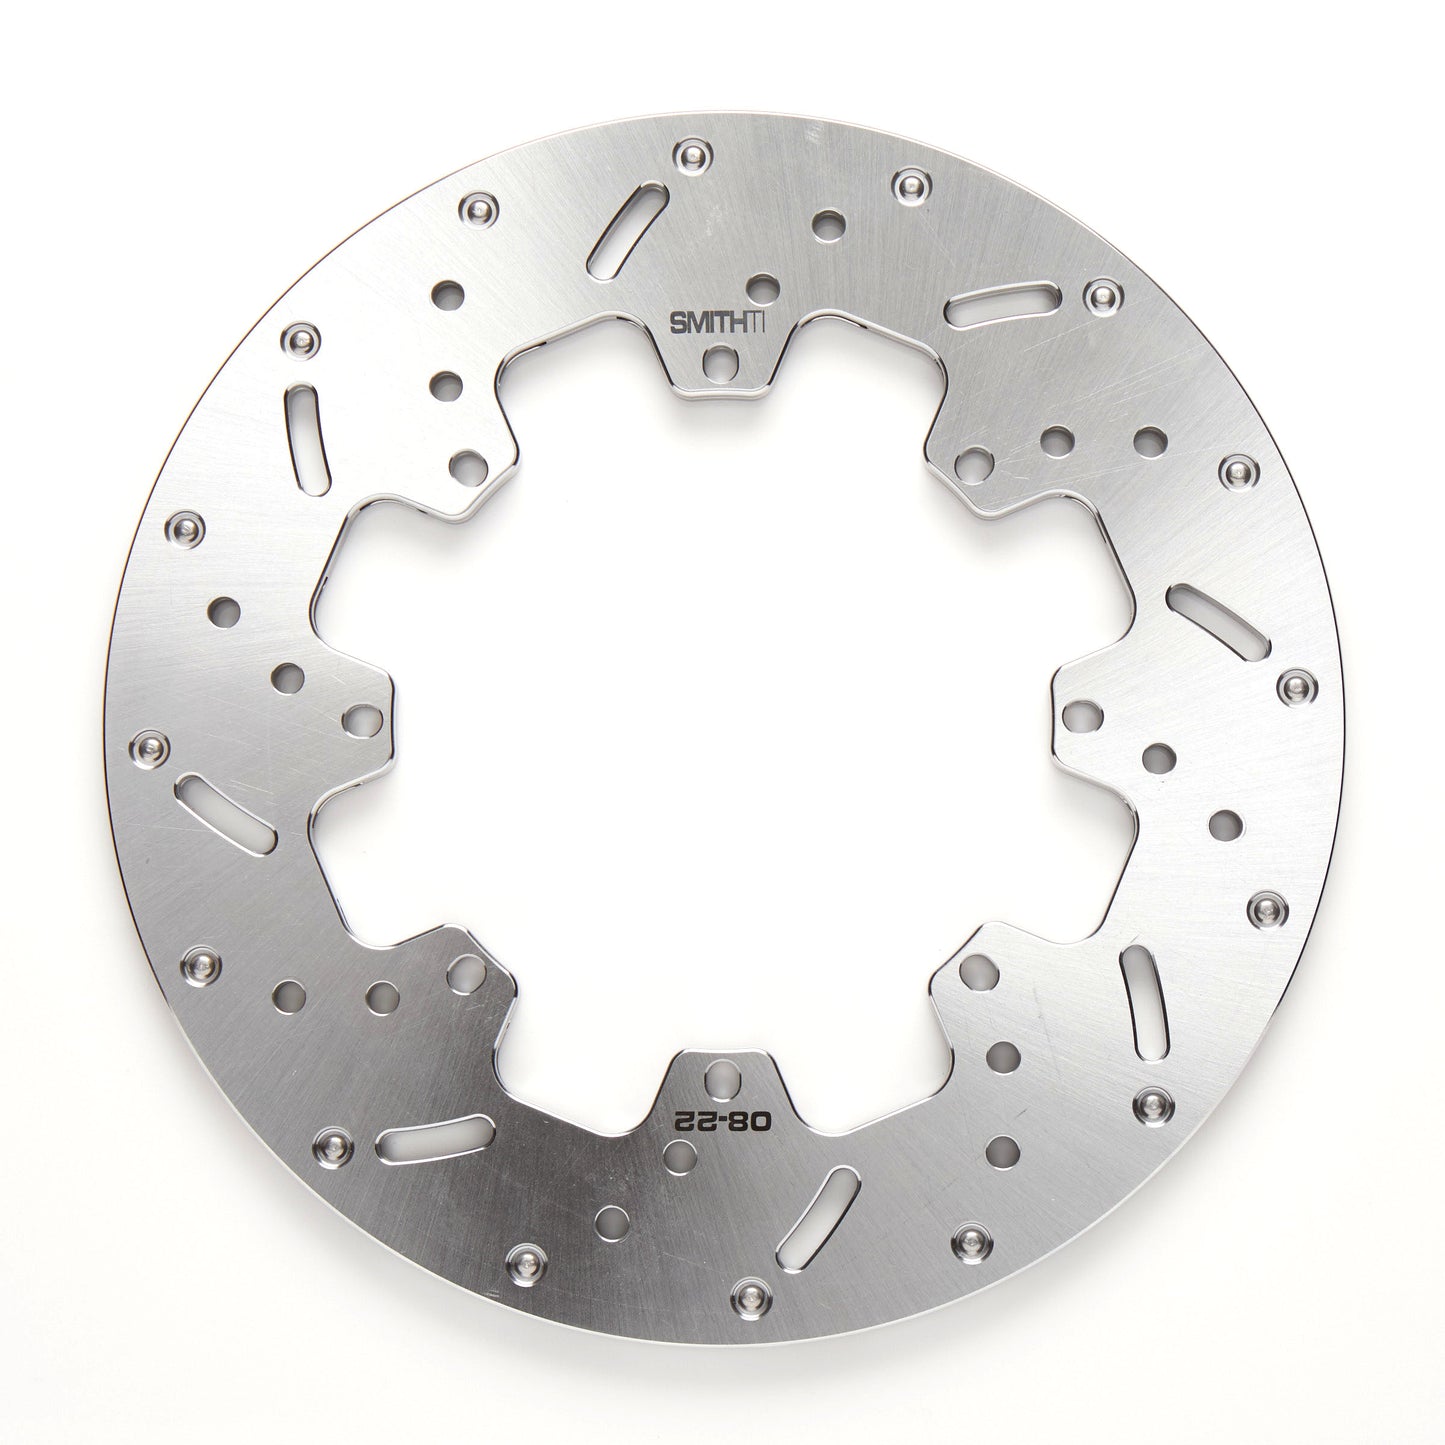 Smith Titanium Stainless Steel Inboard Brake Rotor Super Max TPV for Sprint Cars